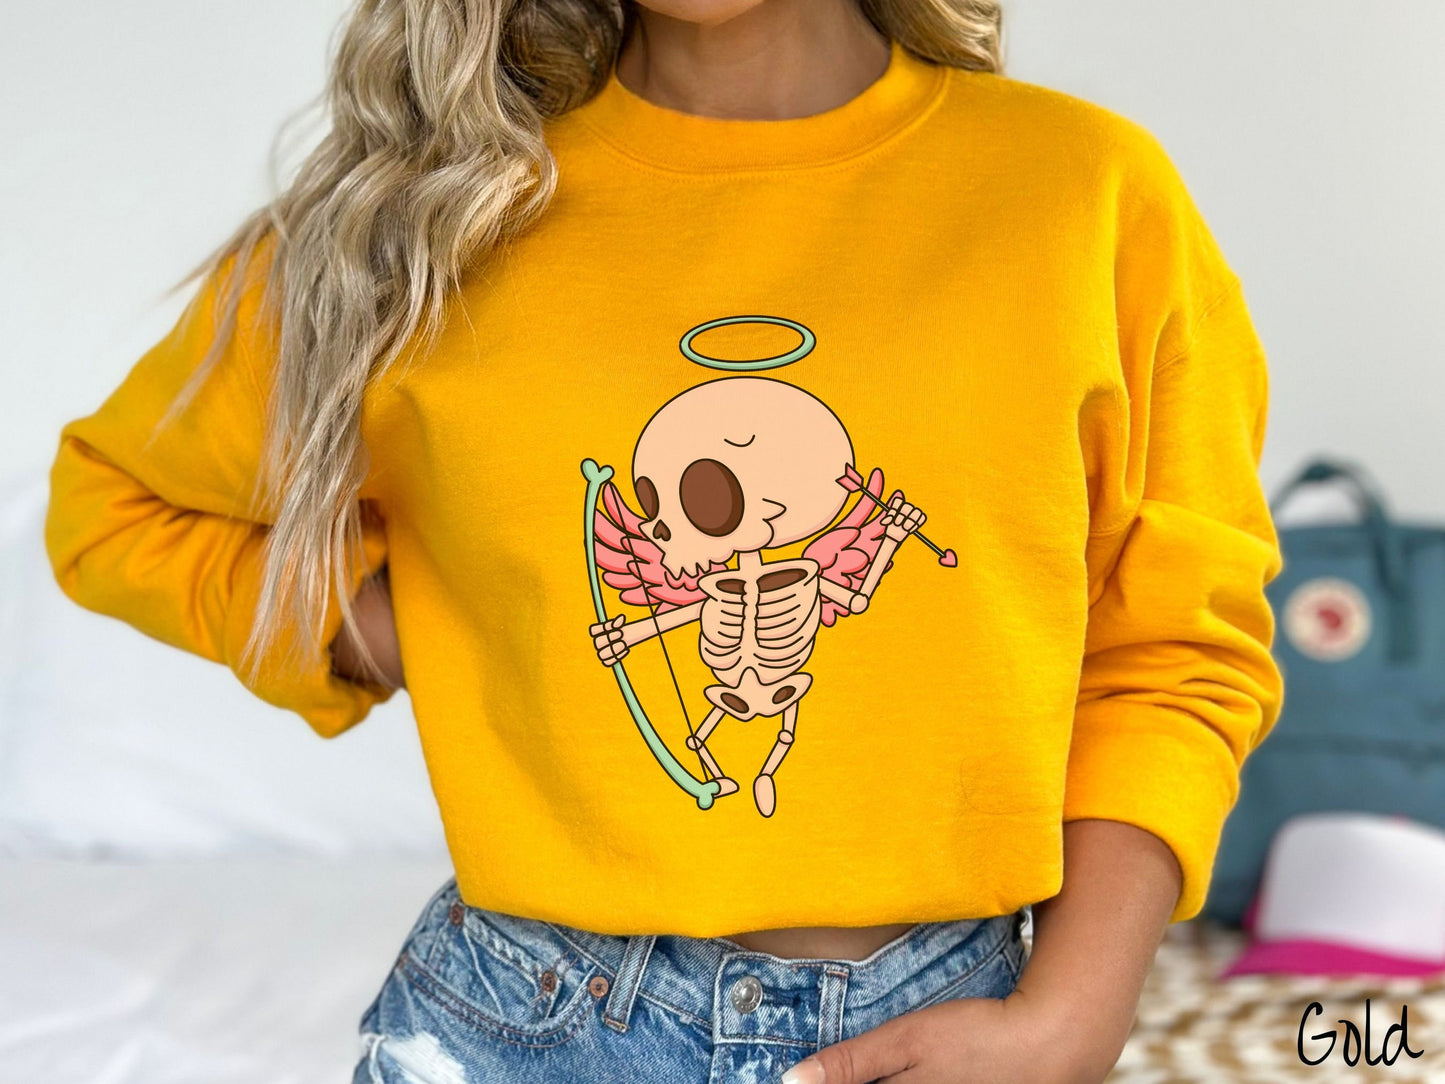 A woman wearing a cute gold colored sweatshirt with a pink winged baby skeleton cupid with a halo holding a heart-tipped arrow in its left hand and a bow in its right hand.